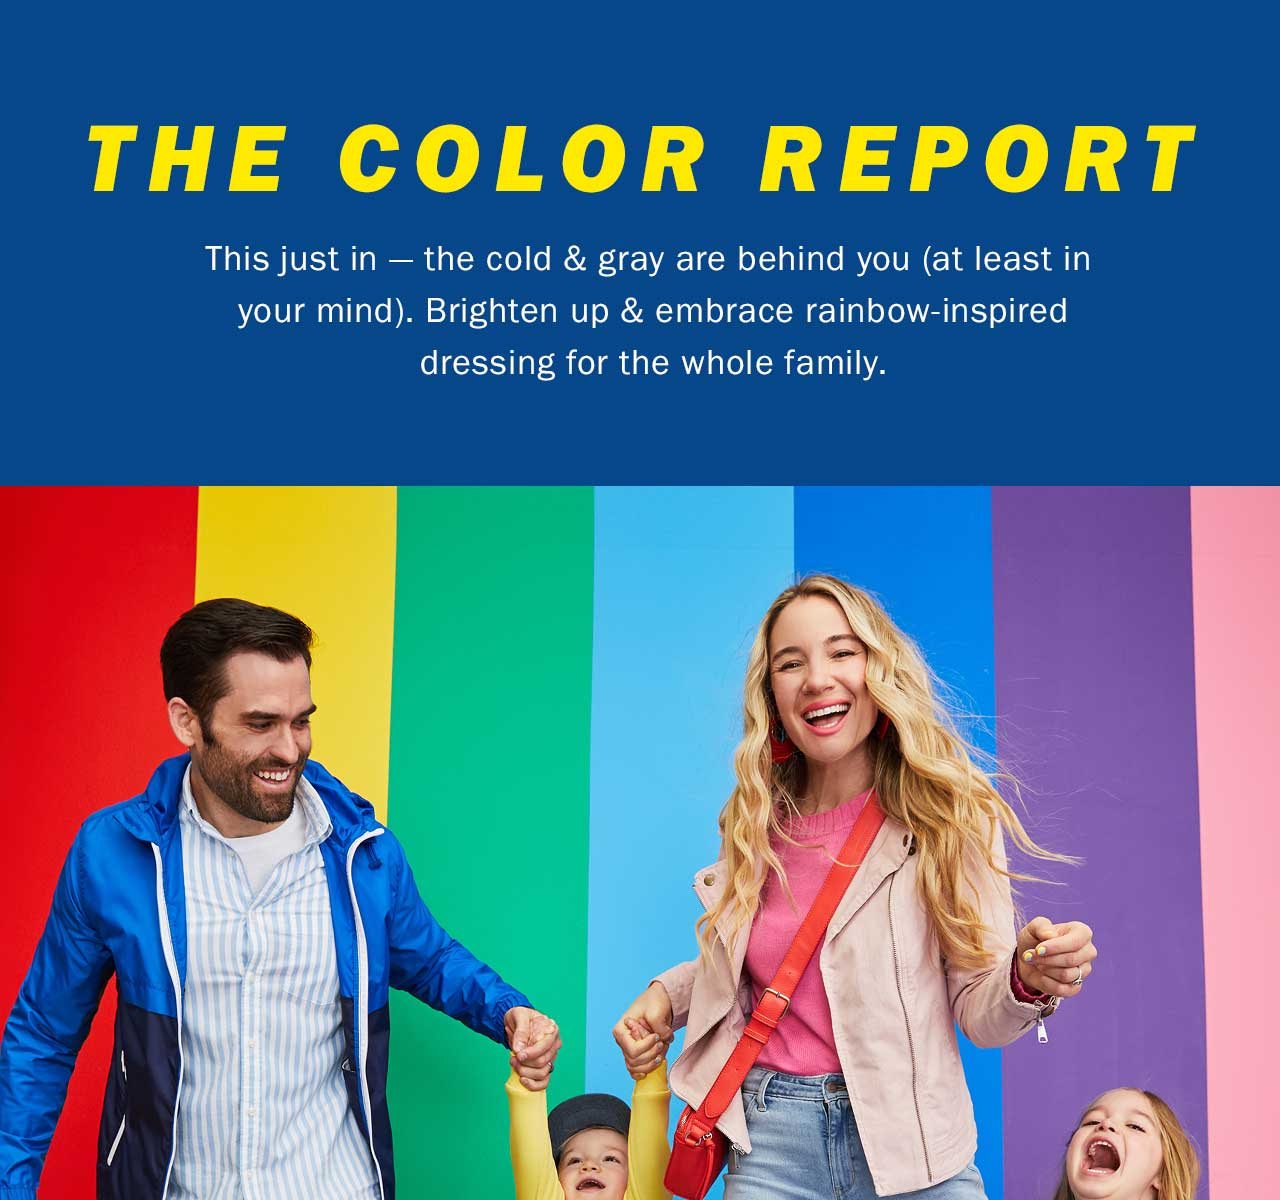 The color report